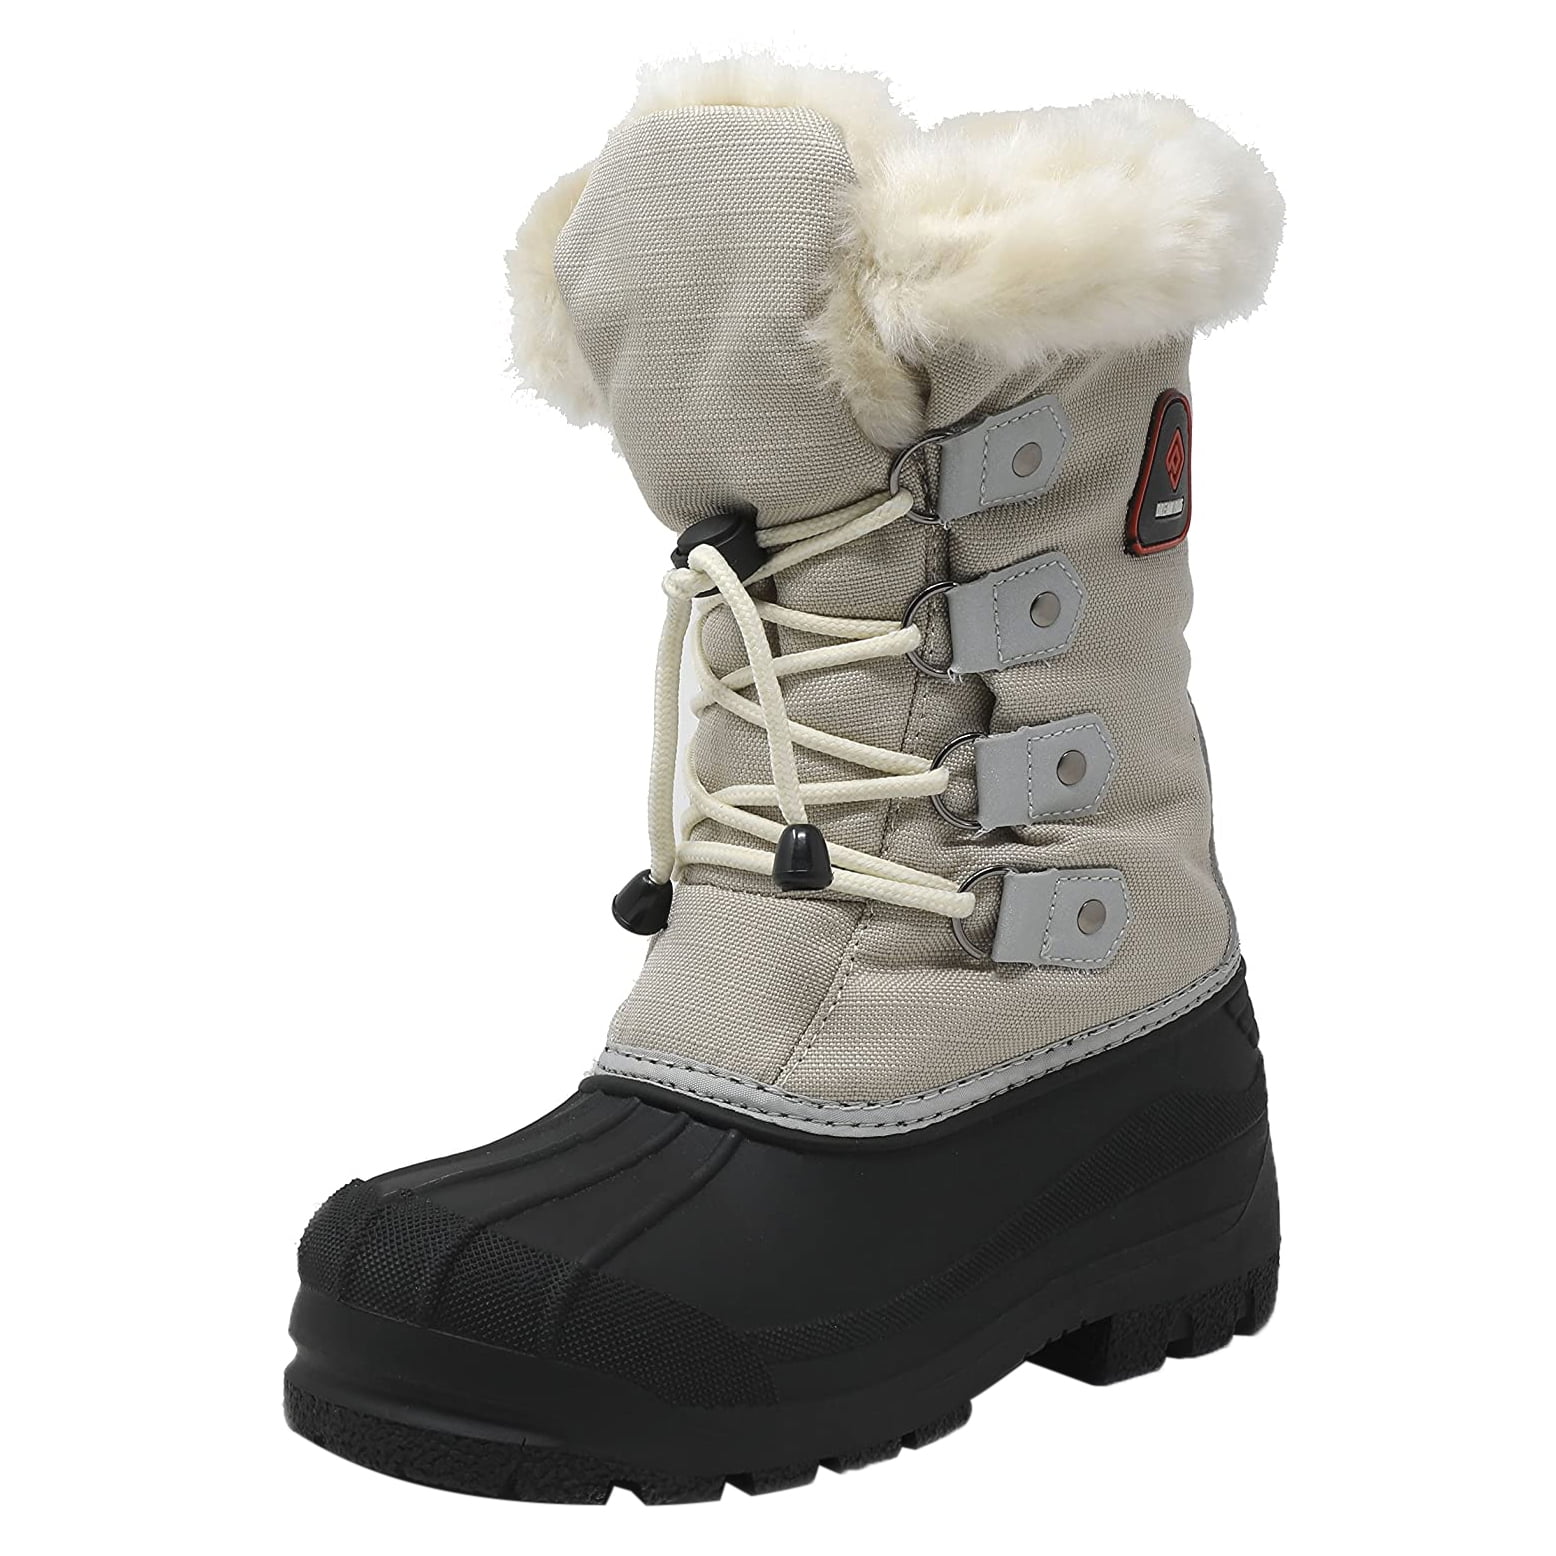 Boys and Girls Cold Weather Snow Boots Waterproof Outdoor Warm Faux Fur Lined Shoes 